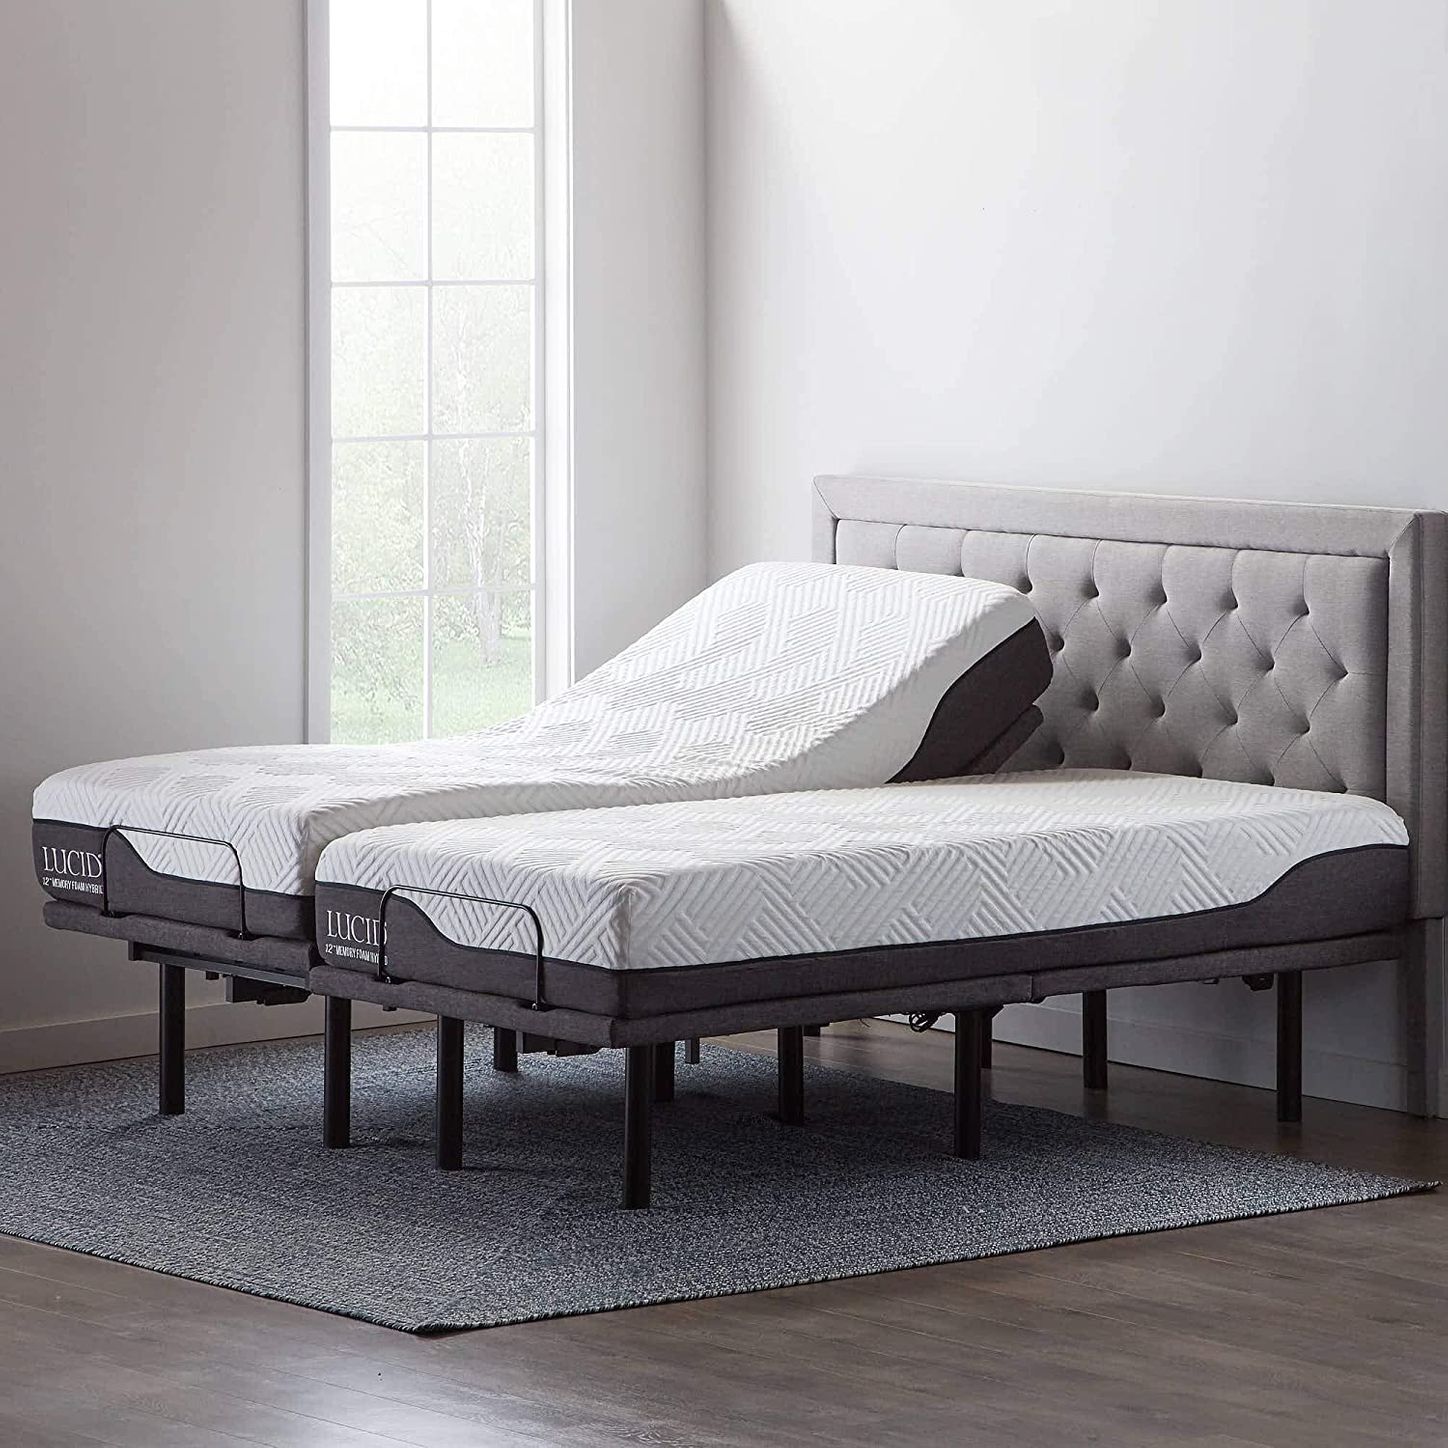 10 Best Adjustable Bed Bases 2022 The, Do They Make Queen Size Split Adjustable Beds